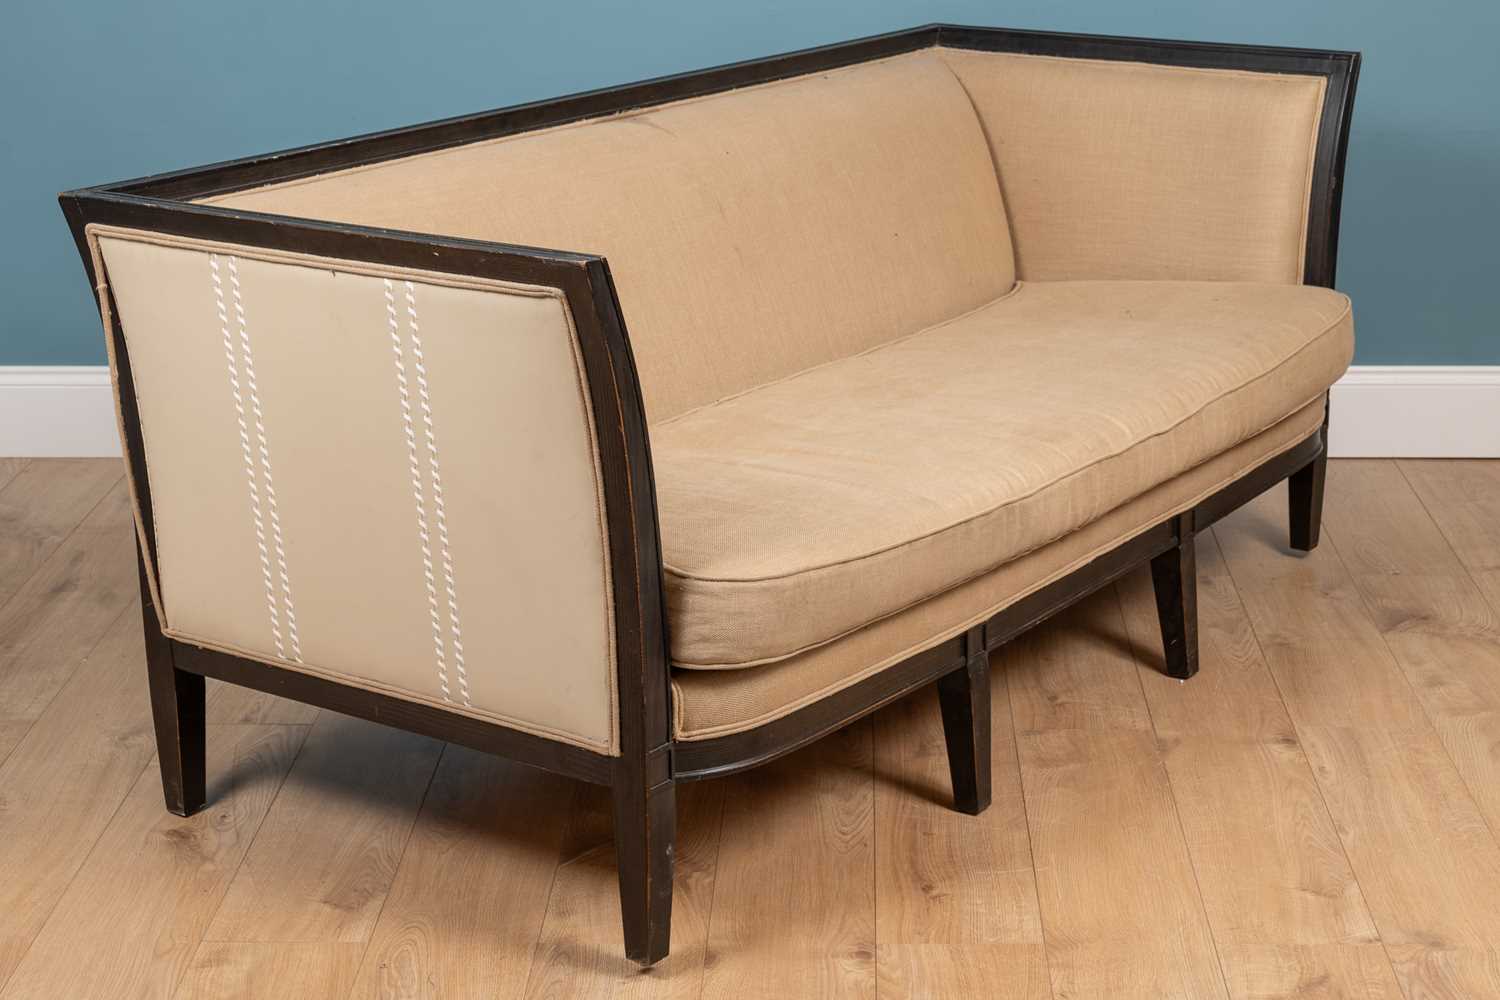 Lot 43 - A contemporary French style dark stained beechwood sofa